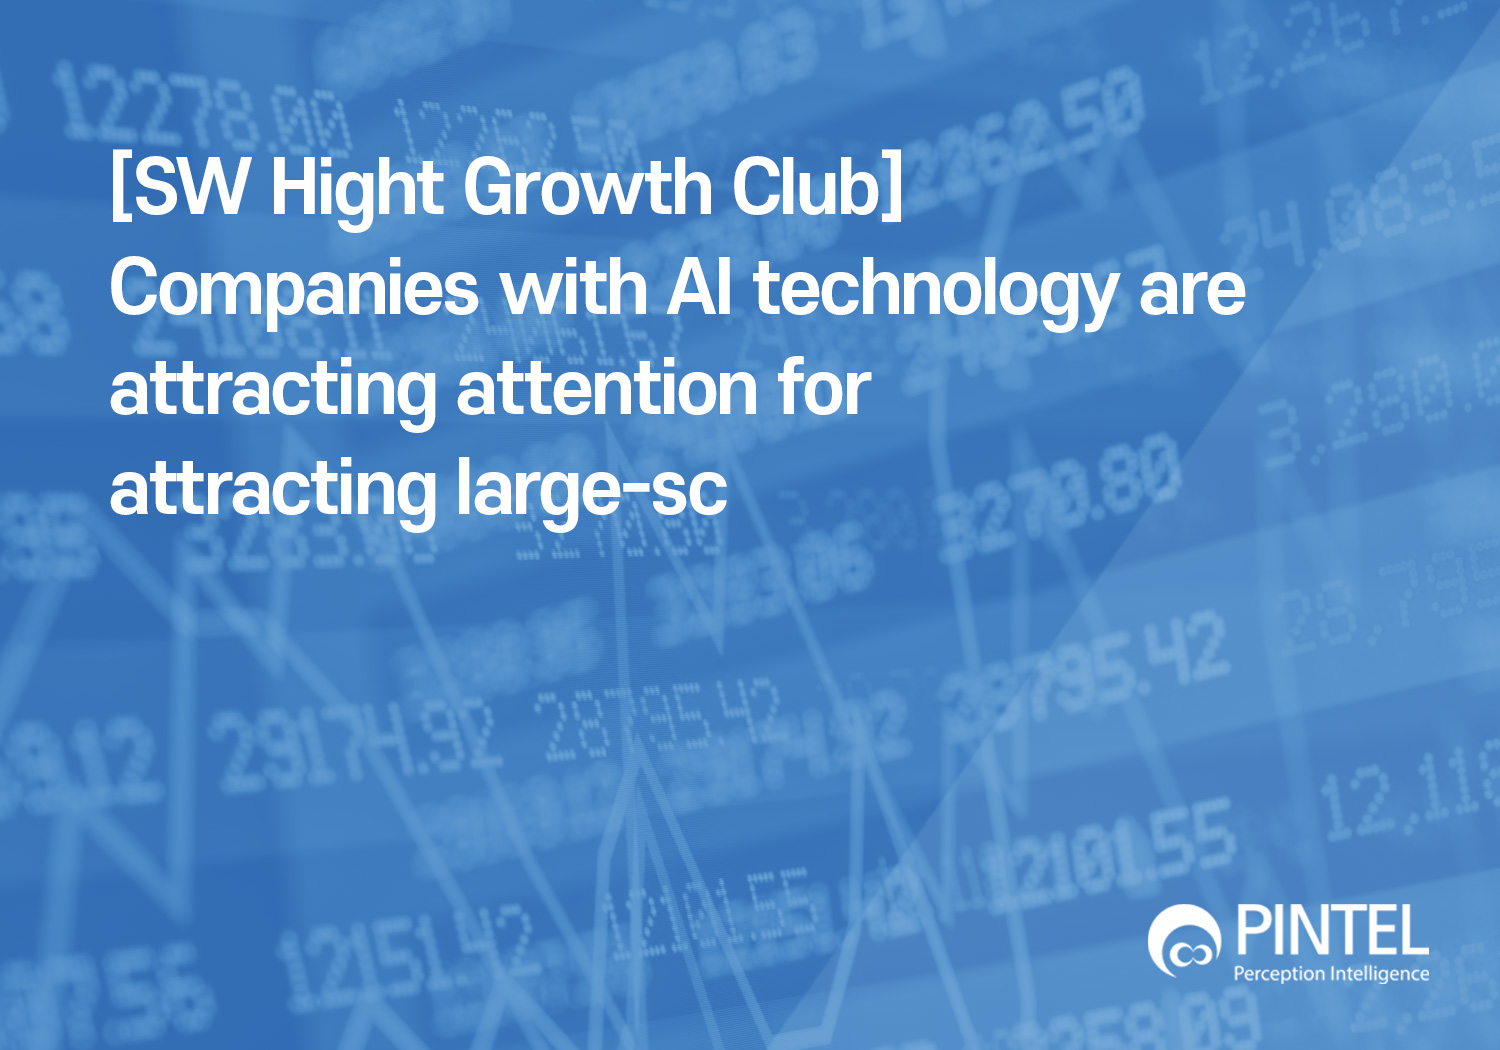 [SW Hight Growth Club] Companies with AI technology are attracting attention for attracting large-sc 썸네일